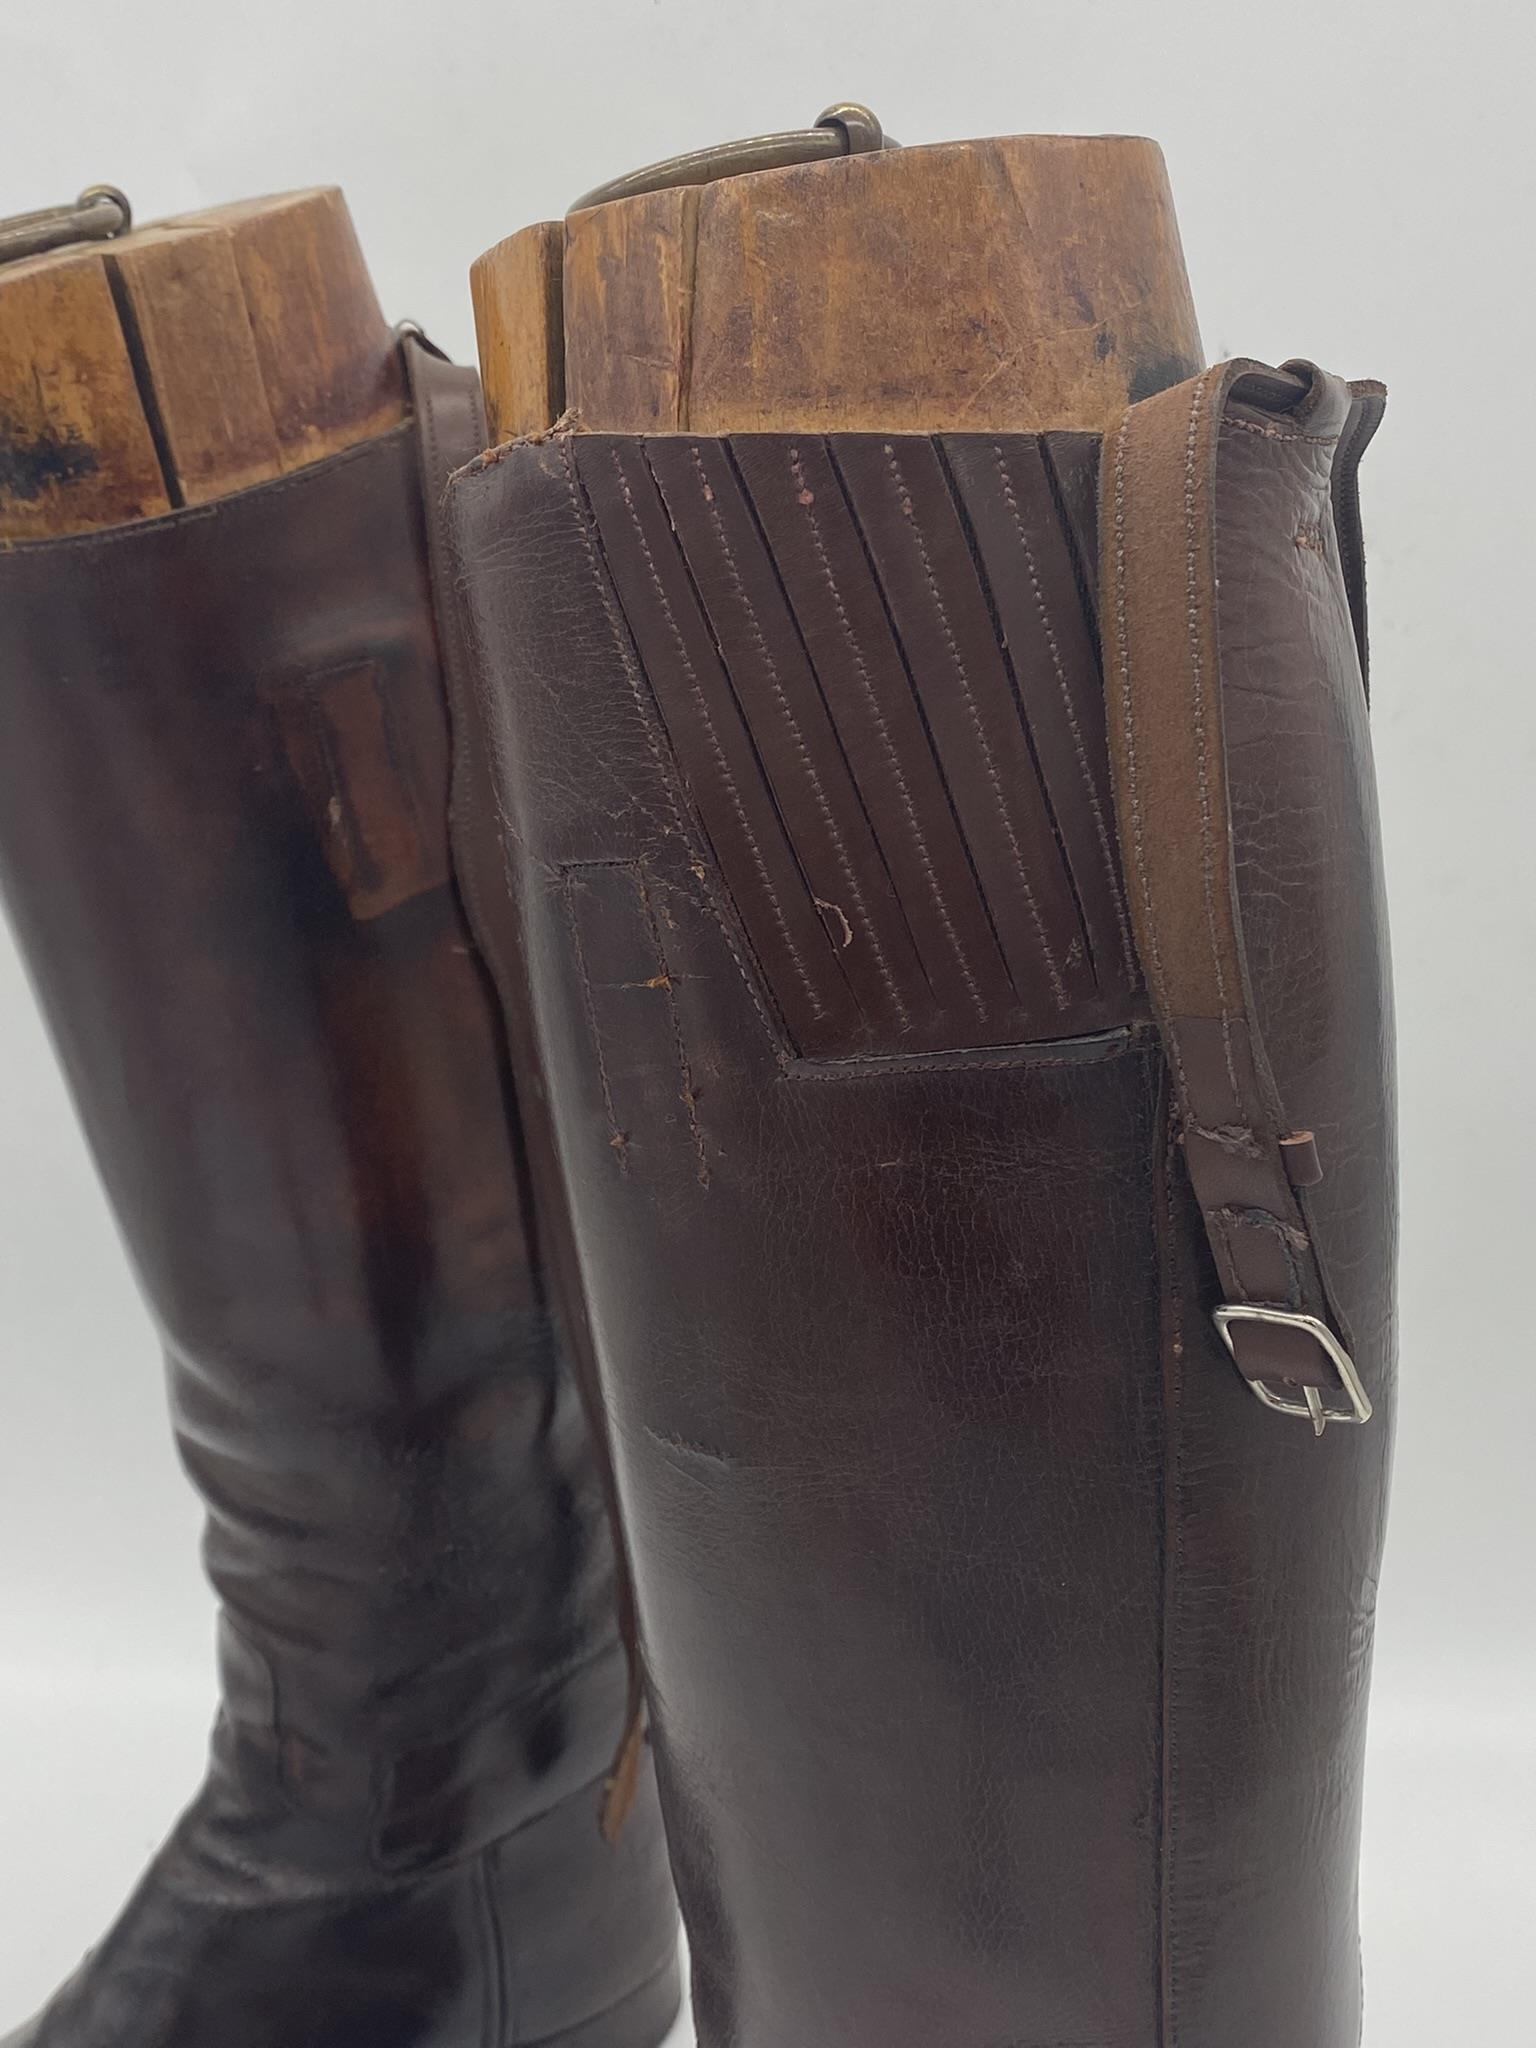 Good pair of leather riding boots with original trees with brass pull handles, 49cm high - Image 2 of 2